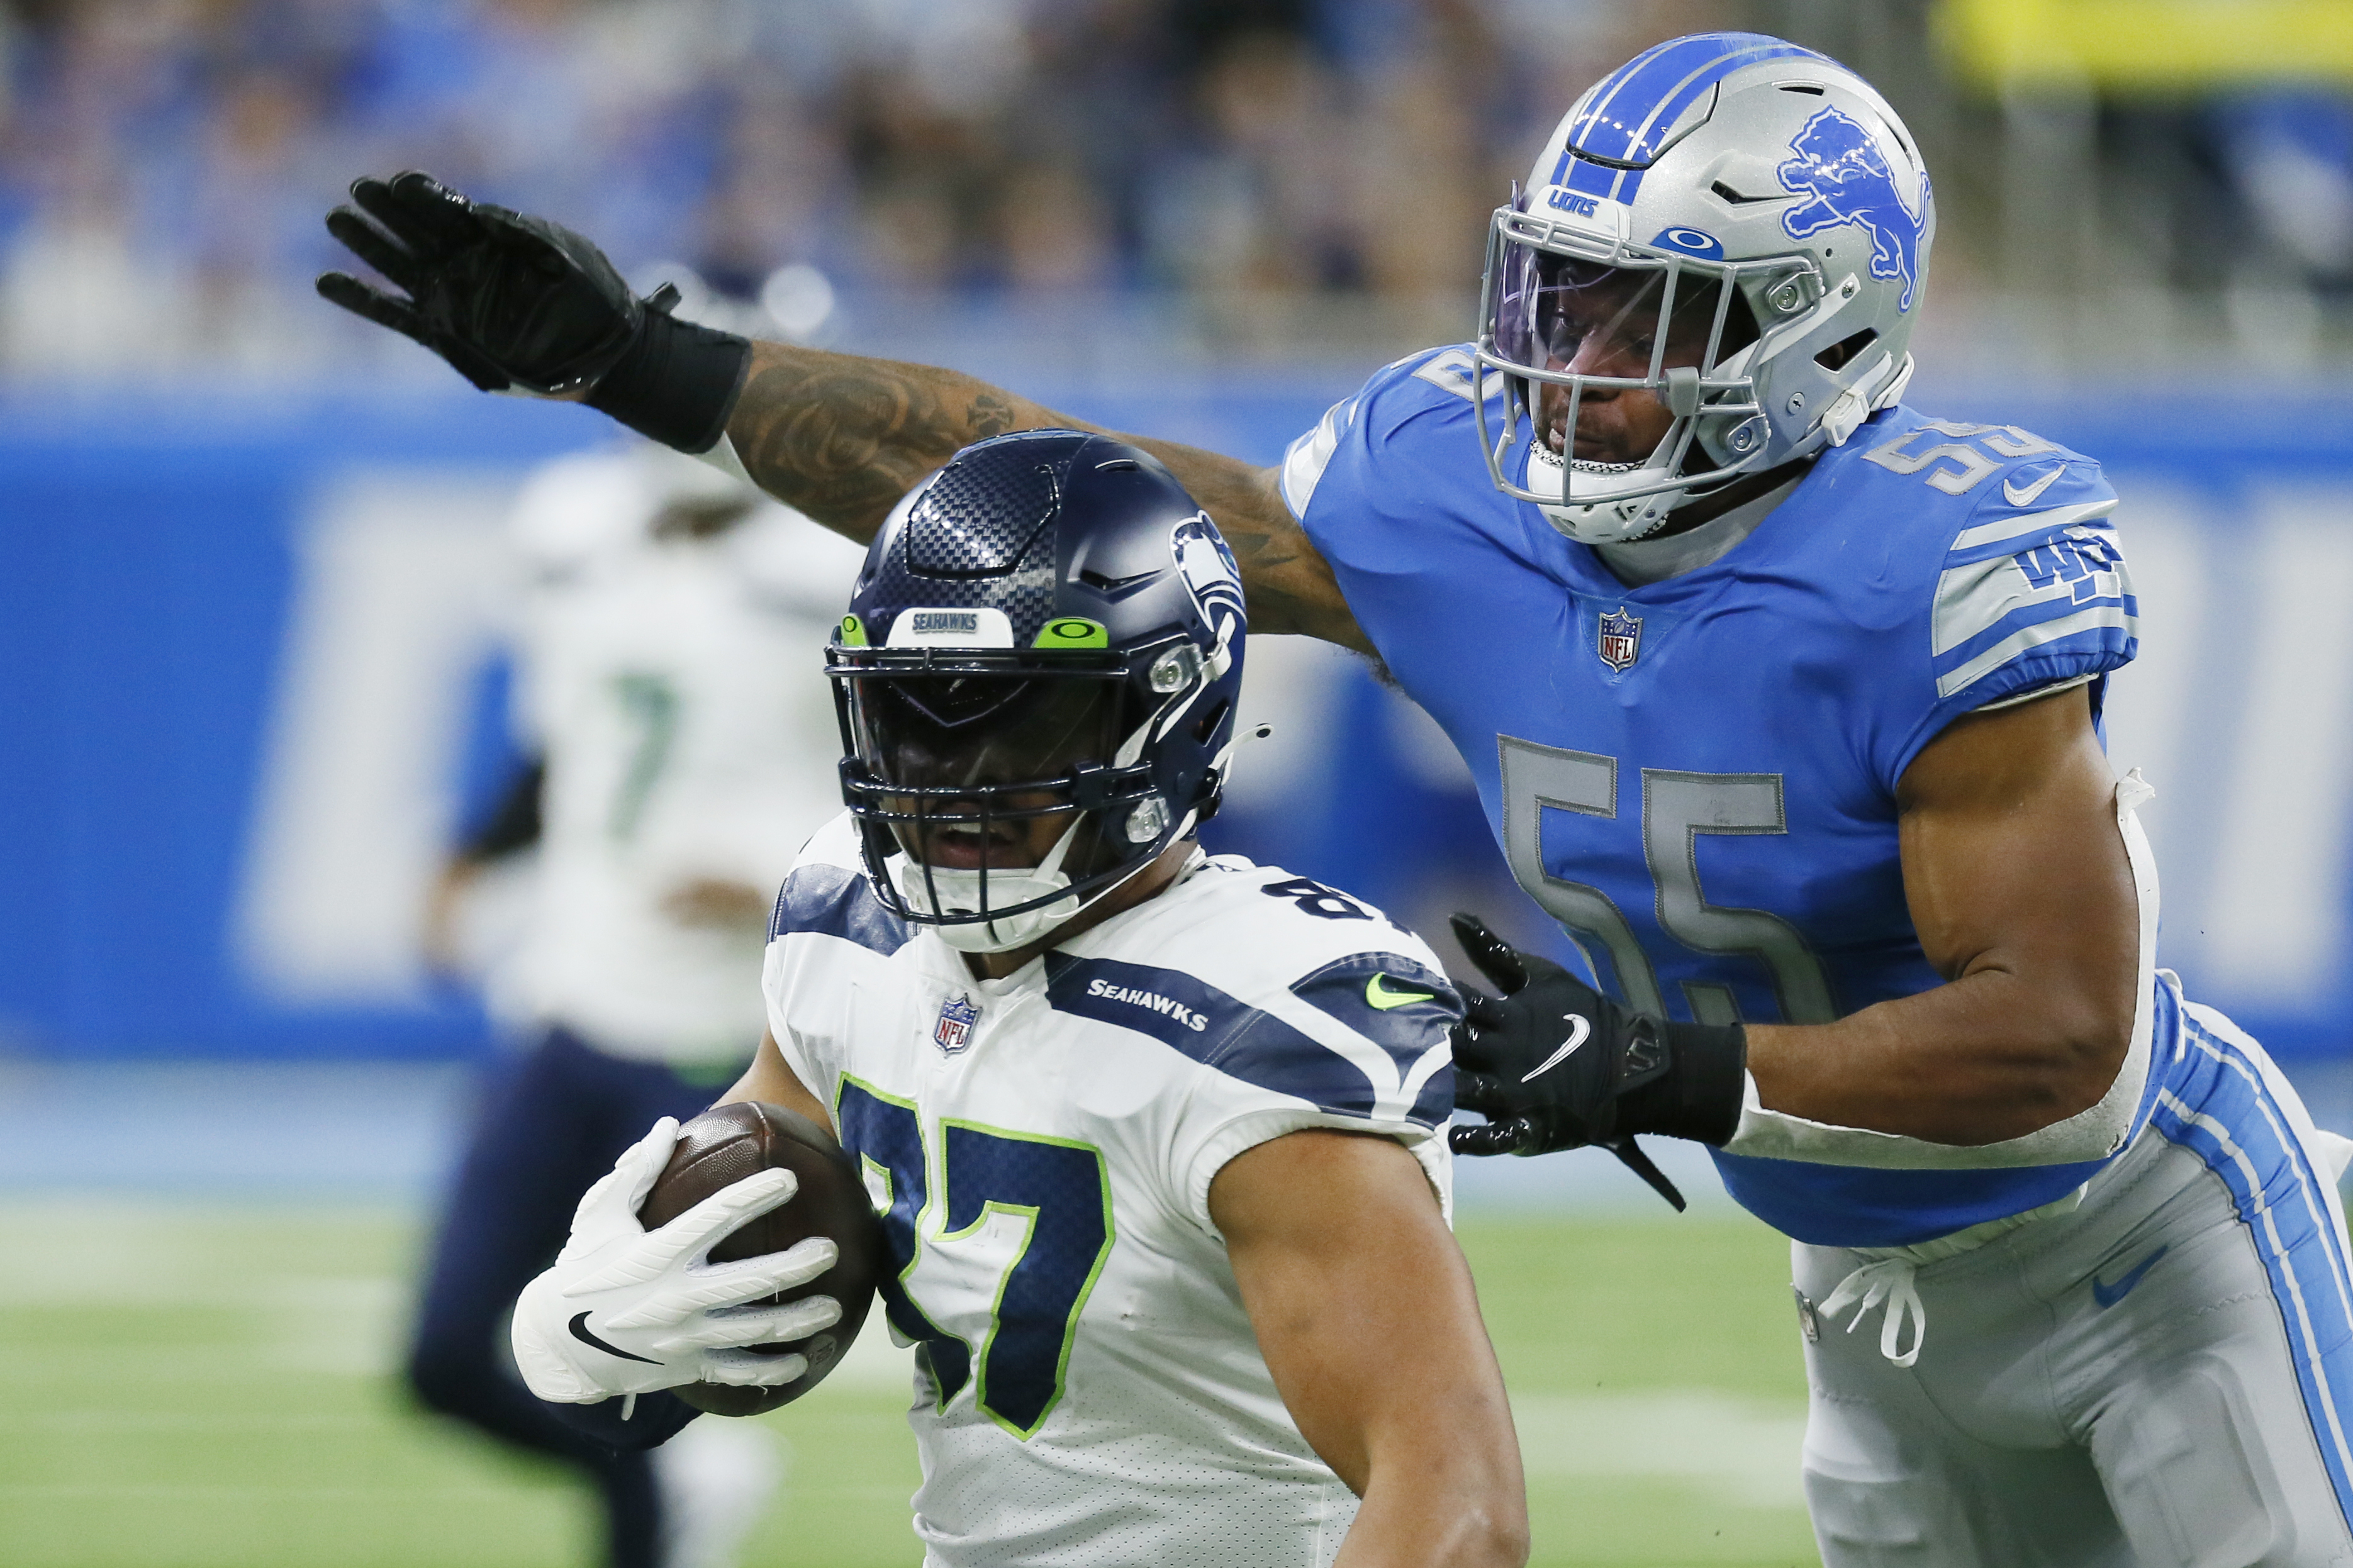 How to Stream the Lions vs. Seahawks Game Live - Week 2